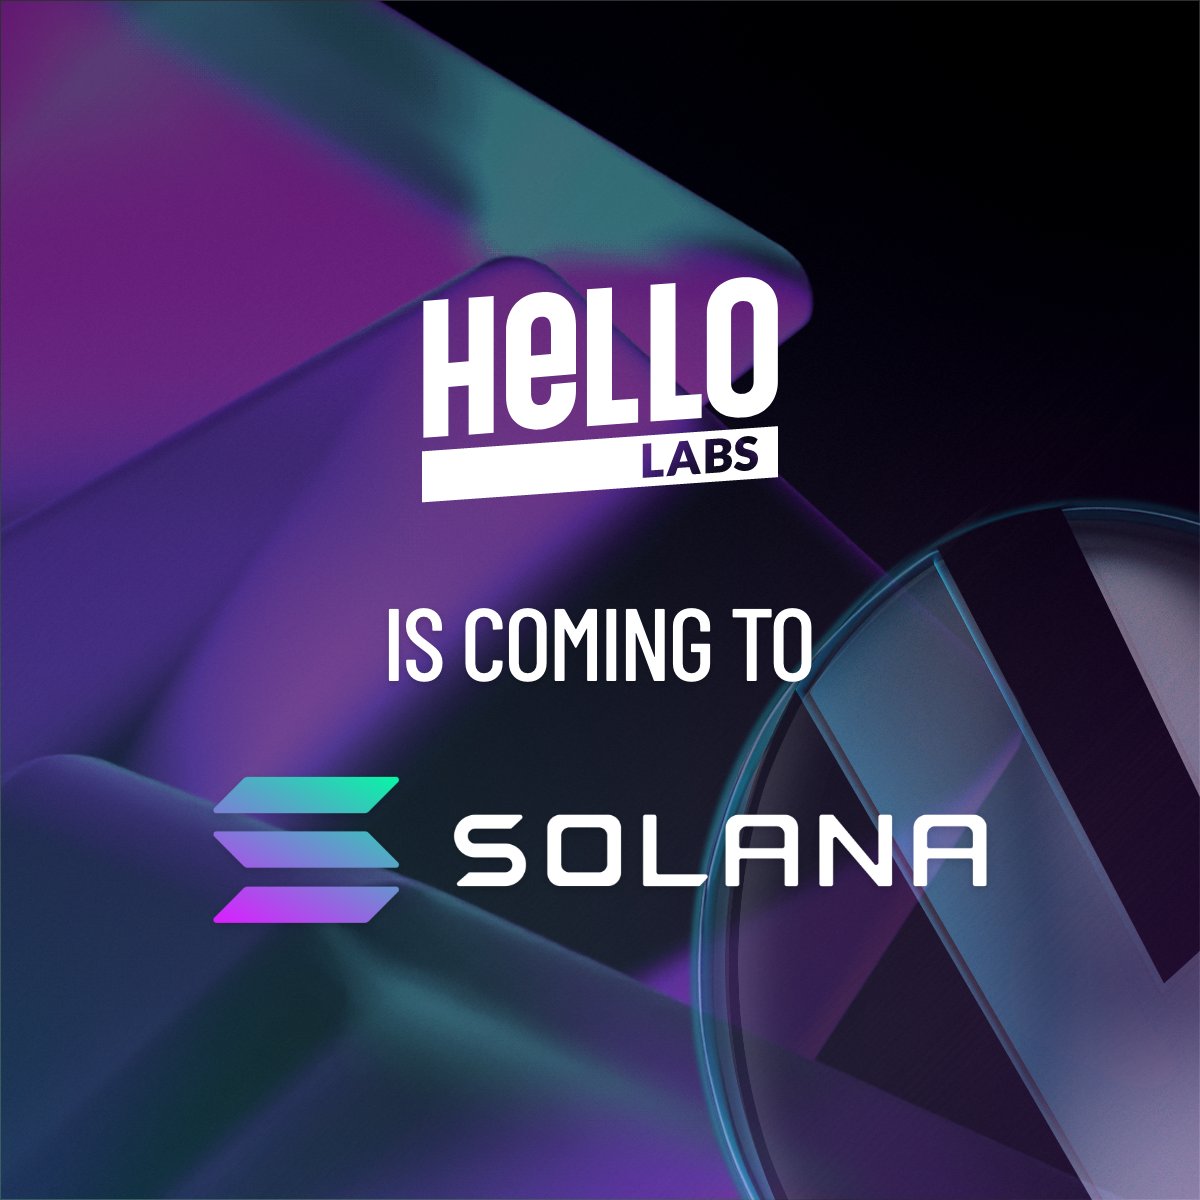 🔶BIG NEWS! 🔶 $HELLO is coming to @solana We are excited for the Solana community to experience the HELLO ecosystem, featuring hit games and industry-leading TV shows. Our plan is to take advantage of the liquidity pool (LP) unlock next week and rebalance the LP across BNB,